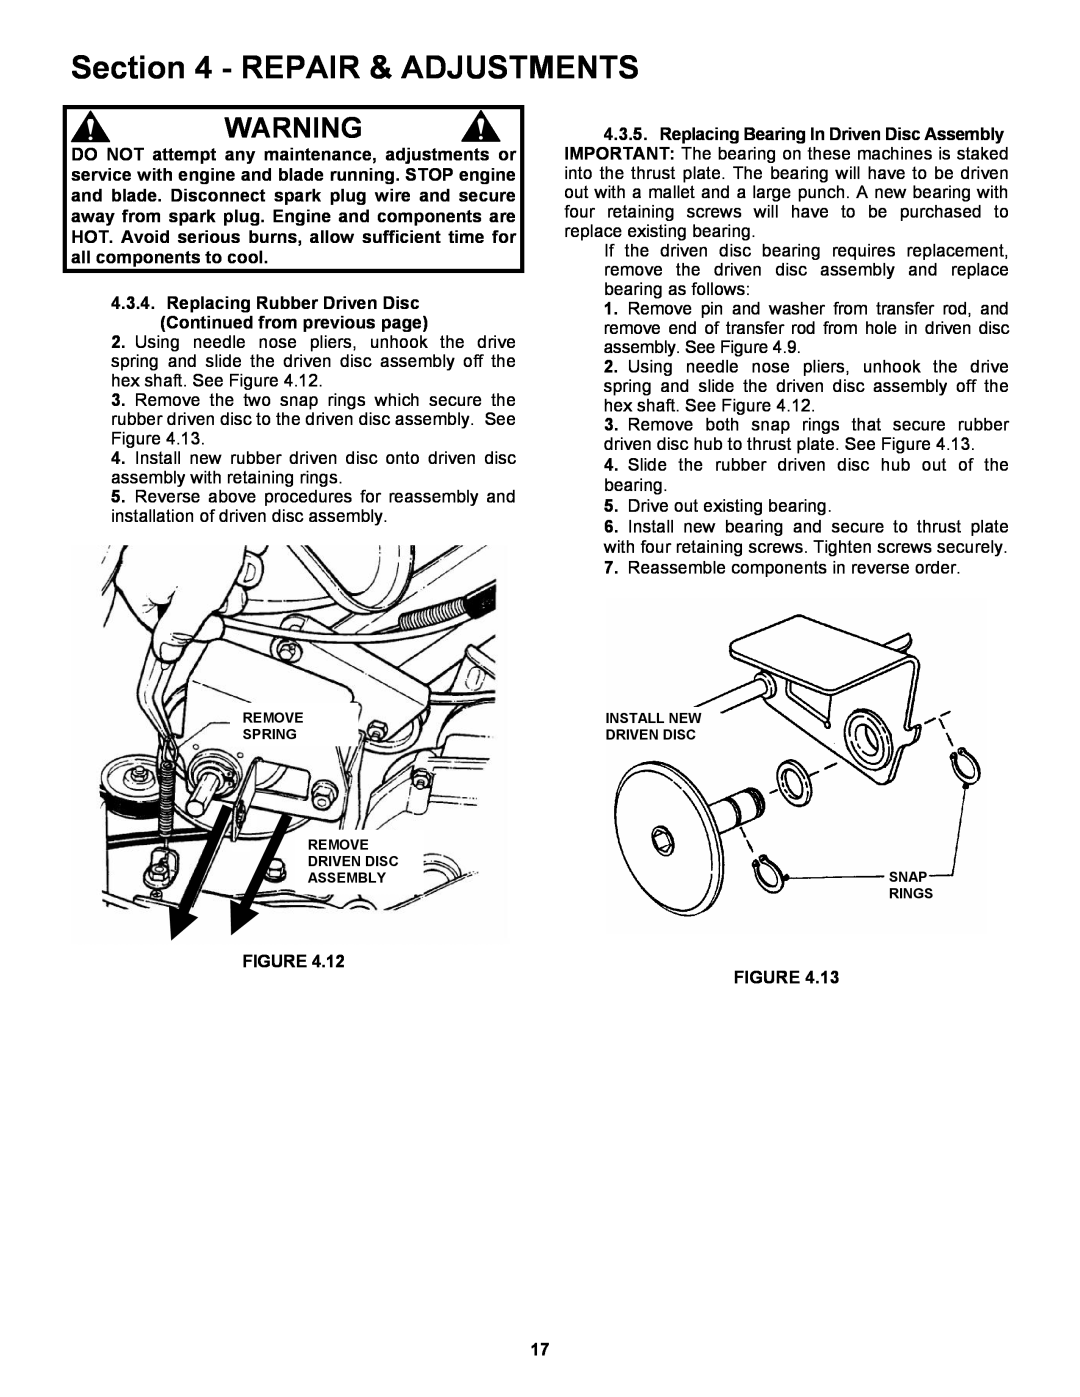 Snapper RP217019BVE, RP2167519B, RP216019KWV important safety instructions Repair & Adjustments, Figure Figure 